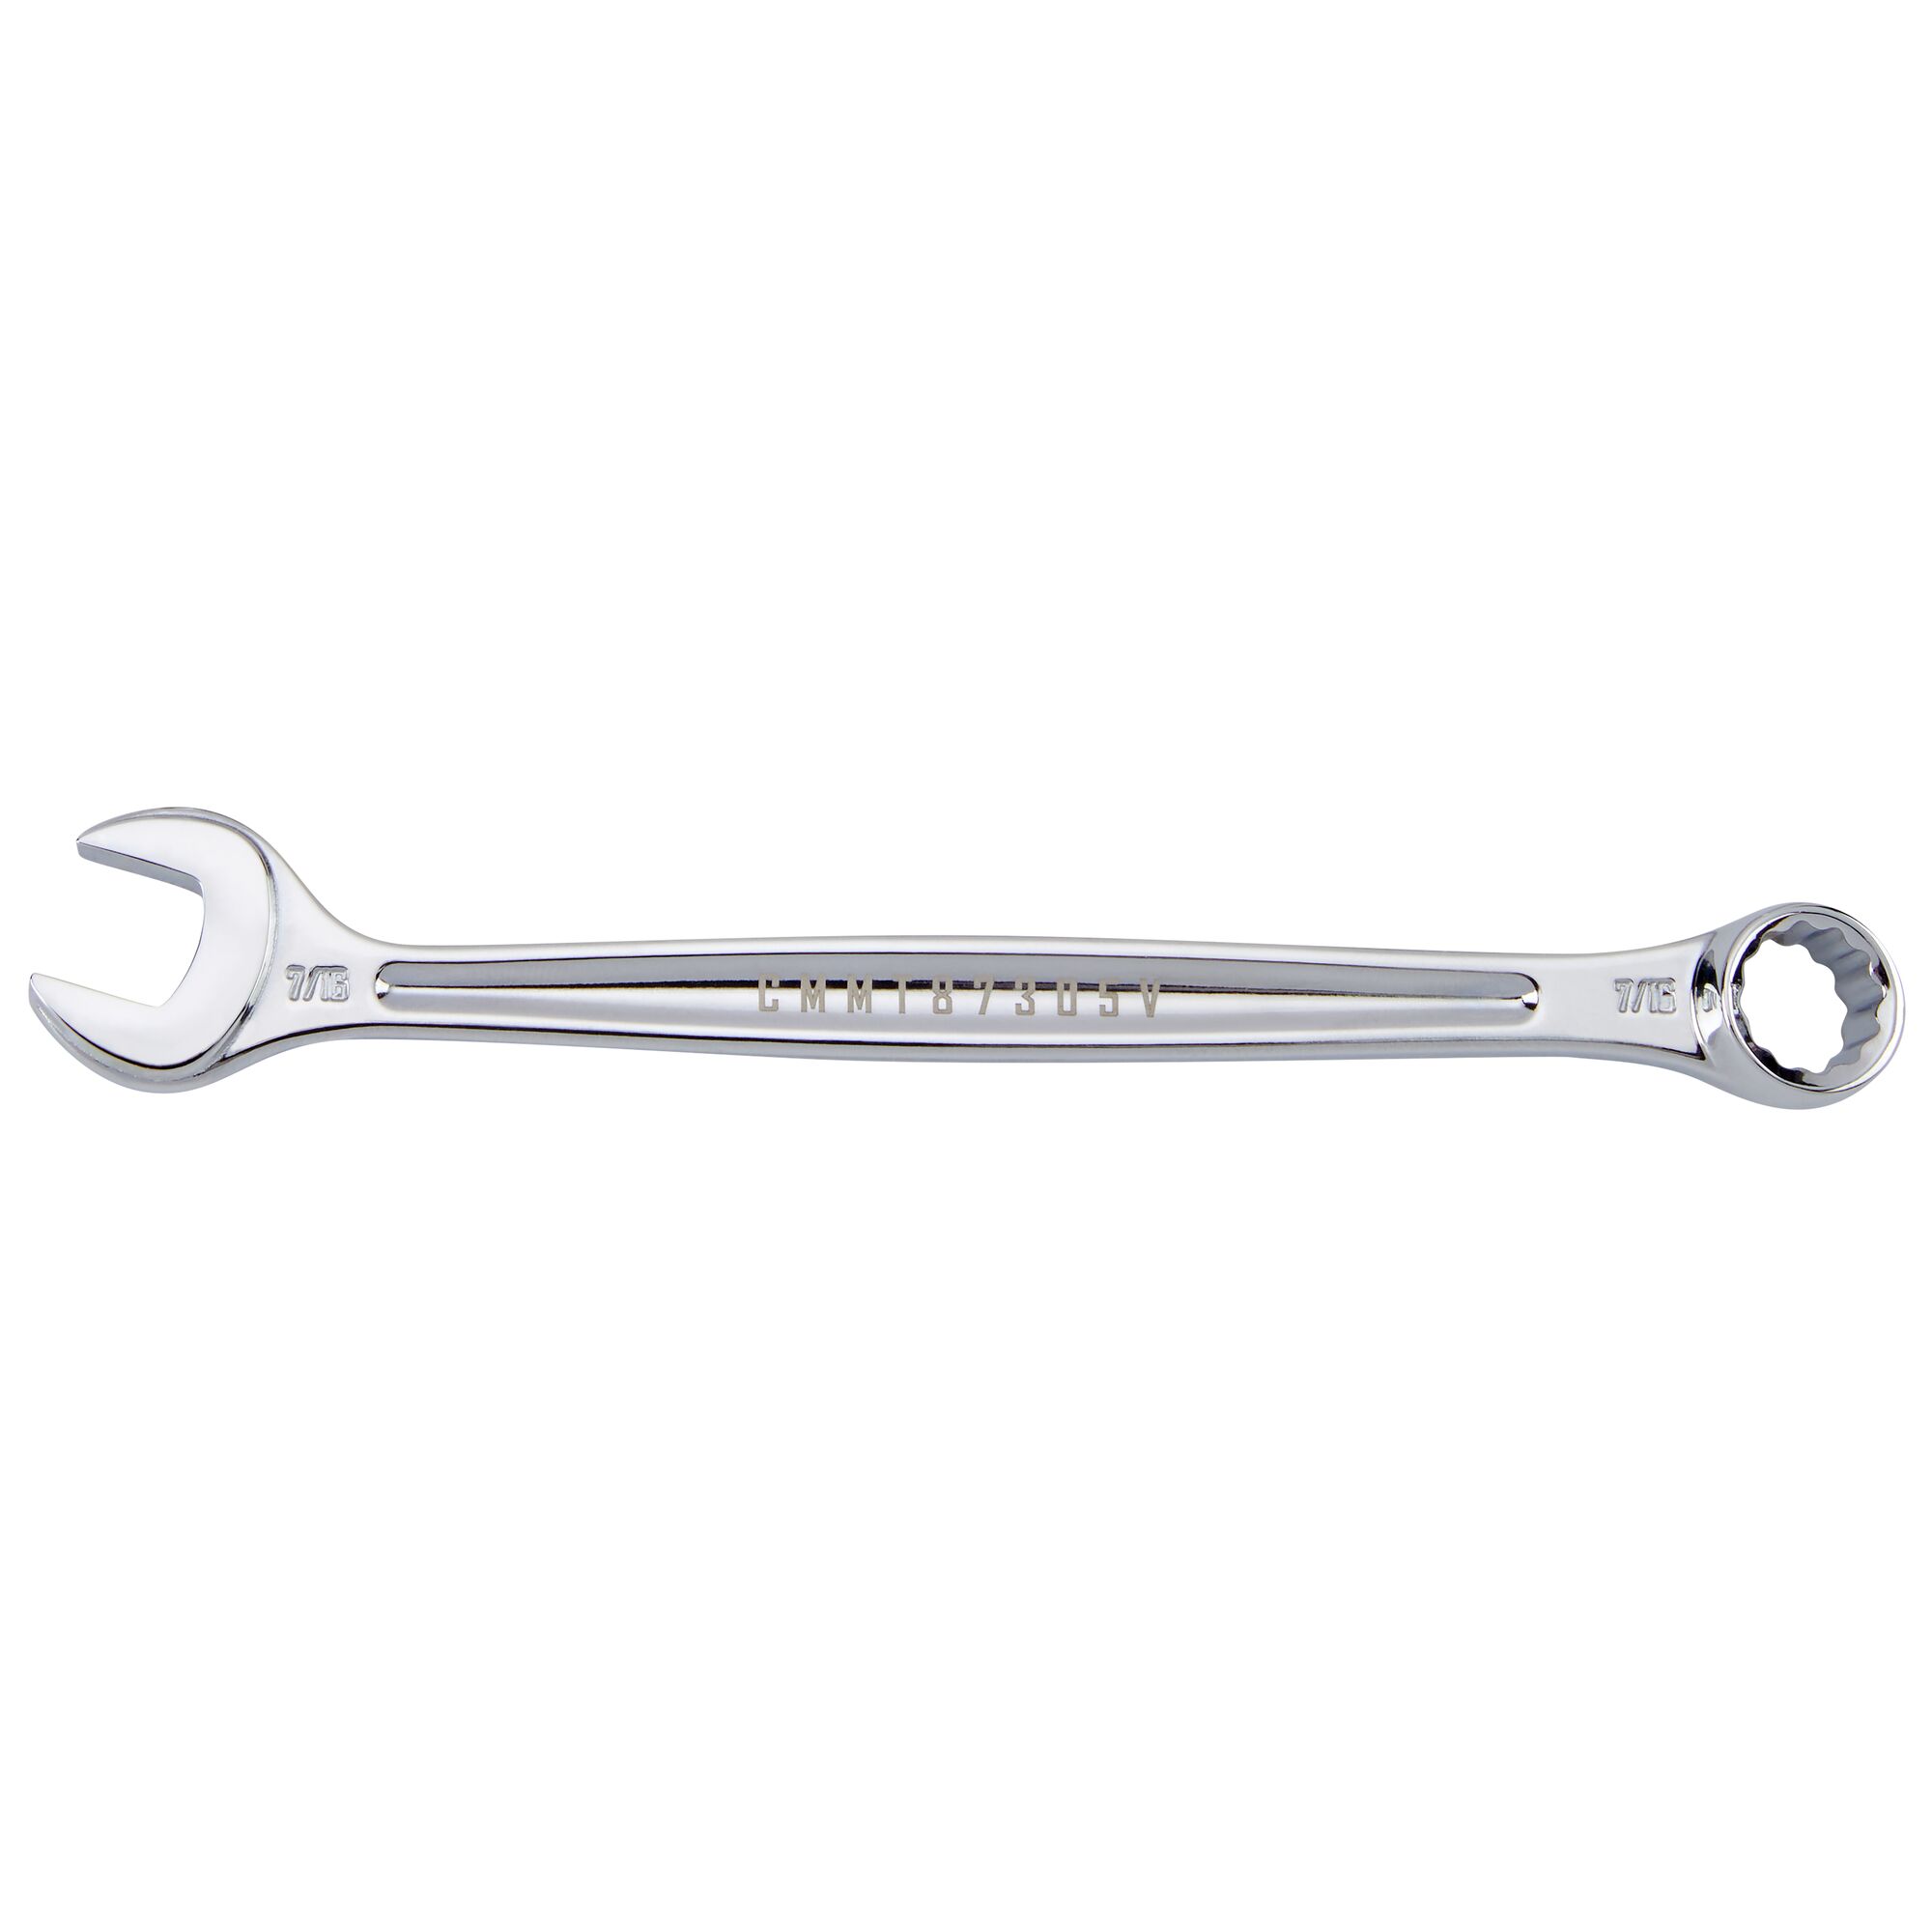 CRAFTSMAN V-SERIES Combo Wrench 7/16 